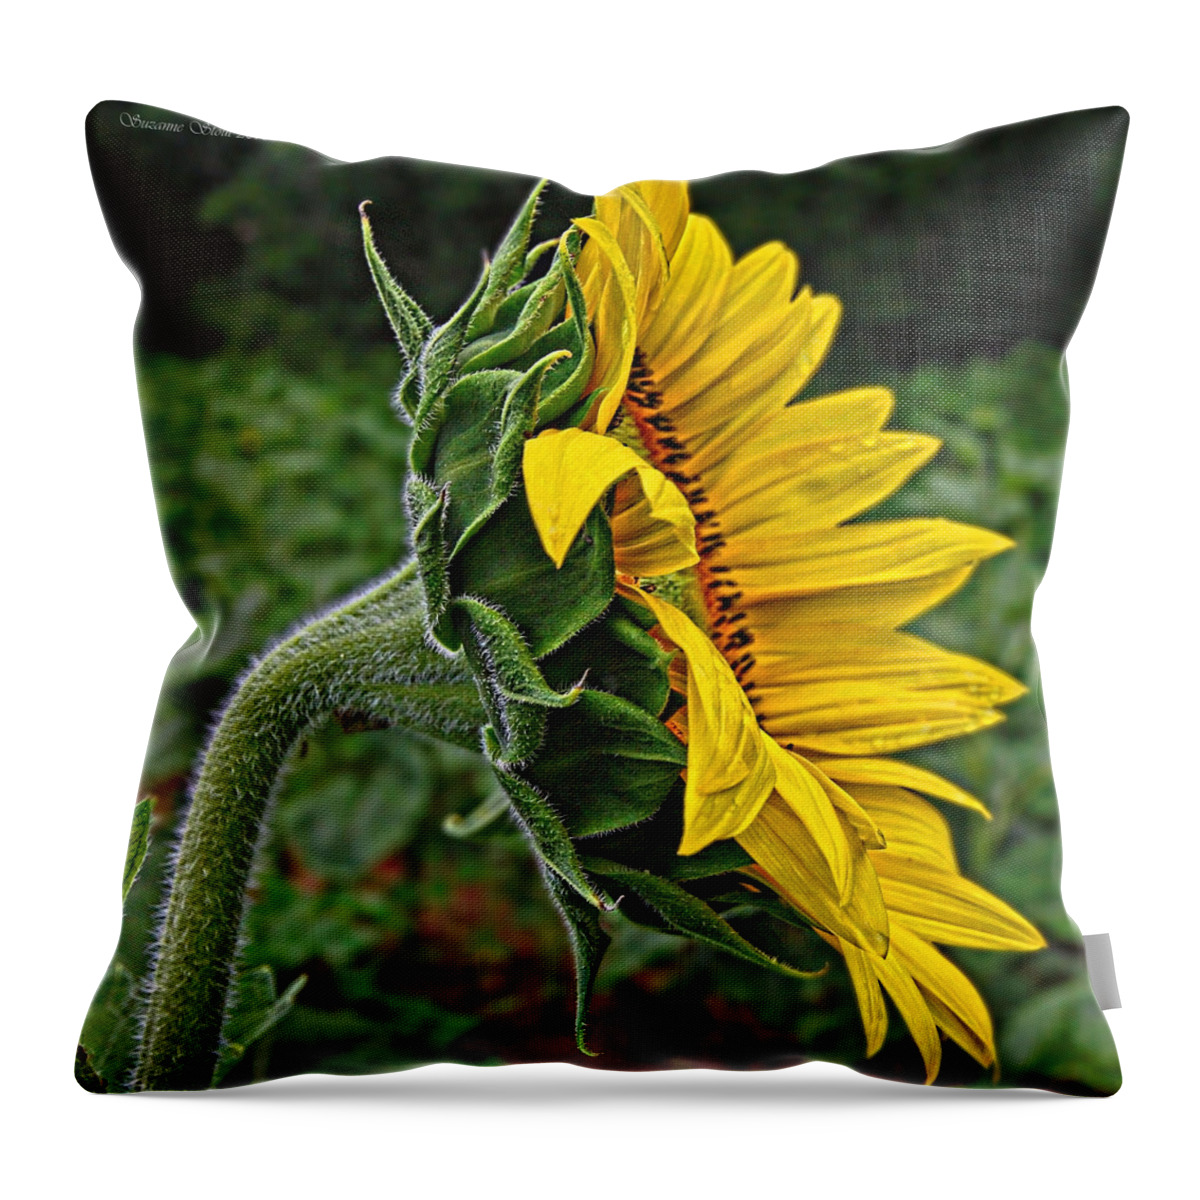 Single Sunflower Throw Pillow featuring the photograph Sunflower Profile by Suzanne Stout